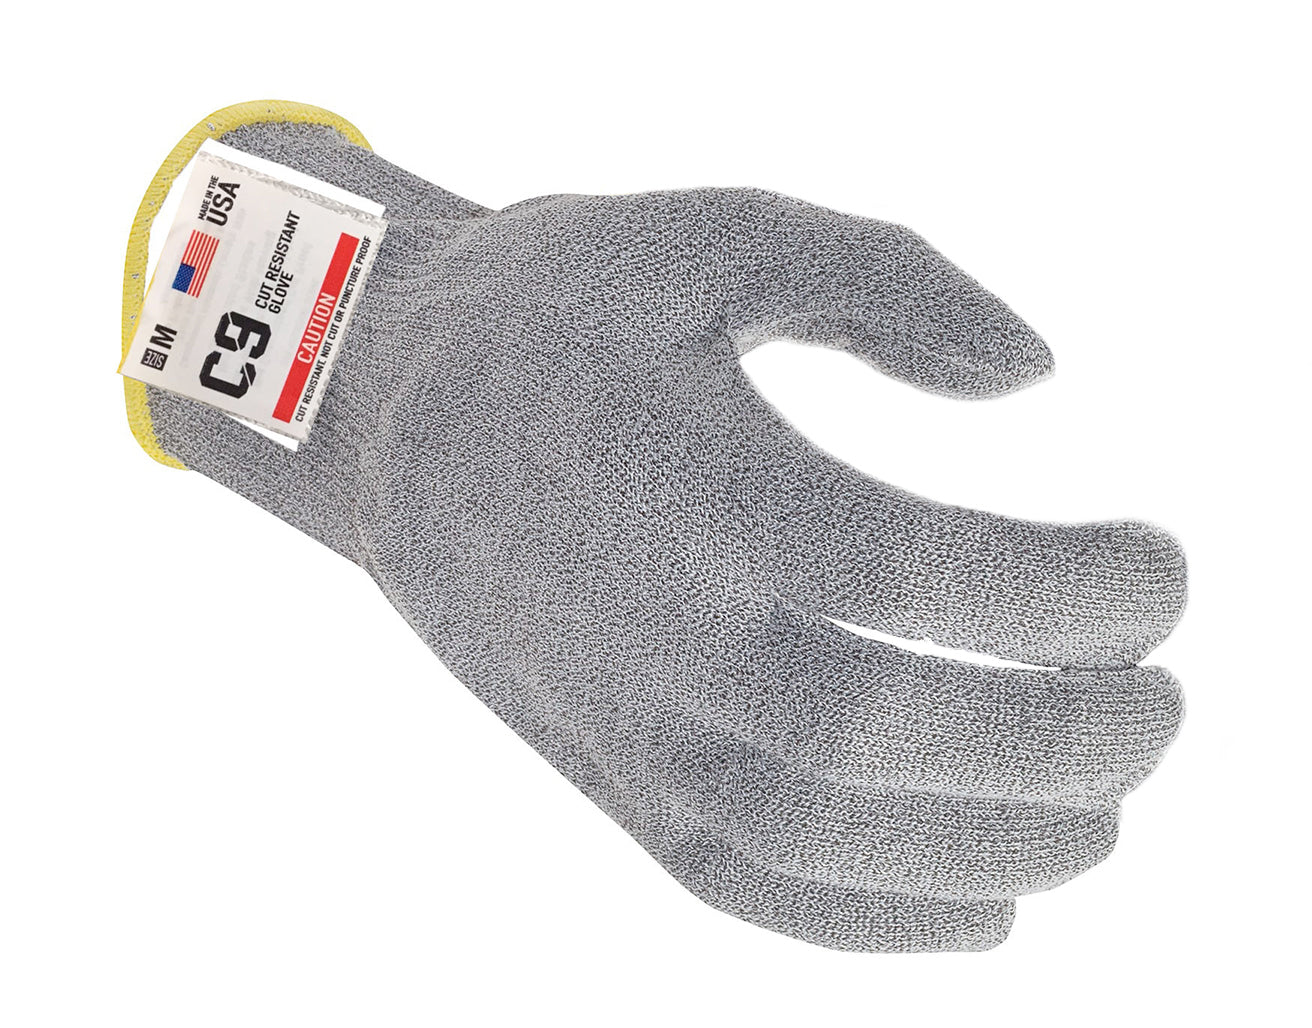 Coated Cut Resistant Box Cutter Safety Glove, ANSI Cut Level 2, Men's